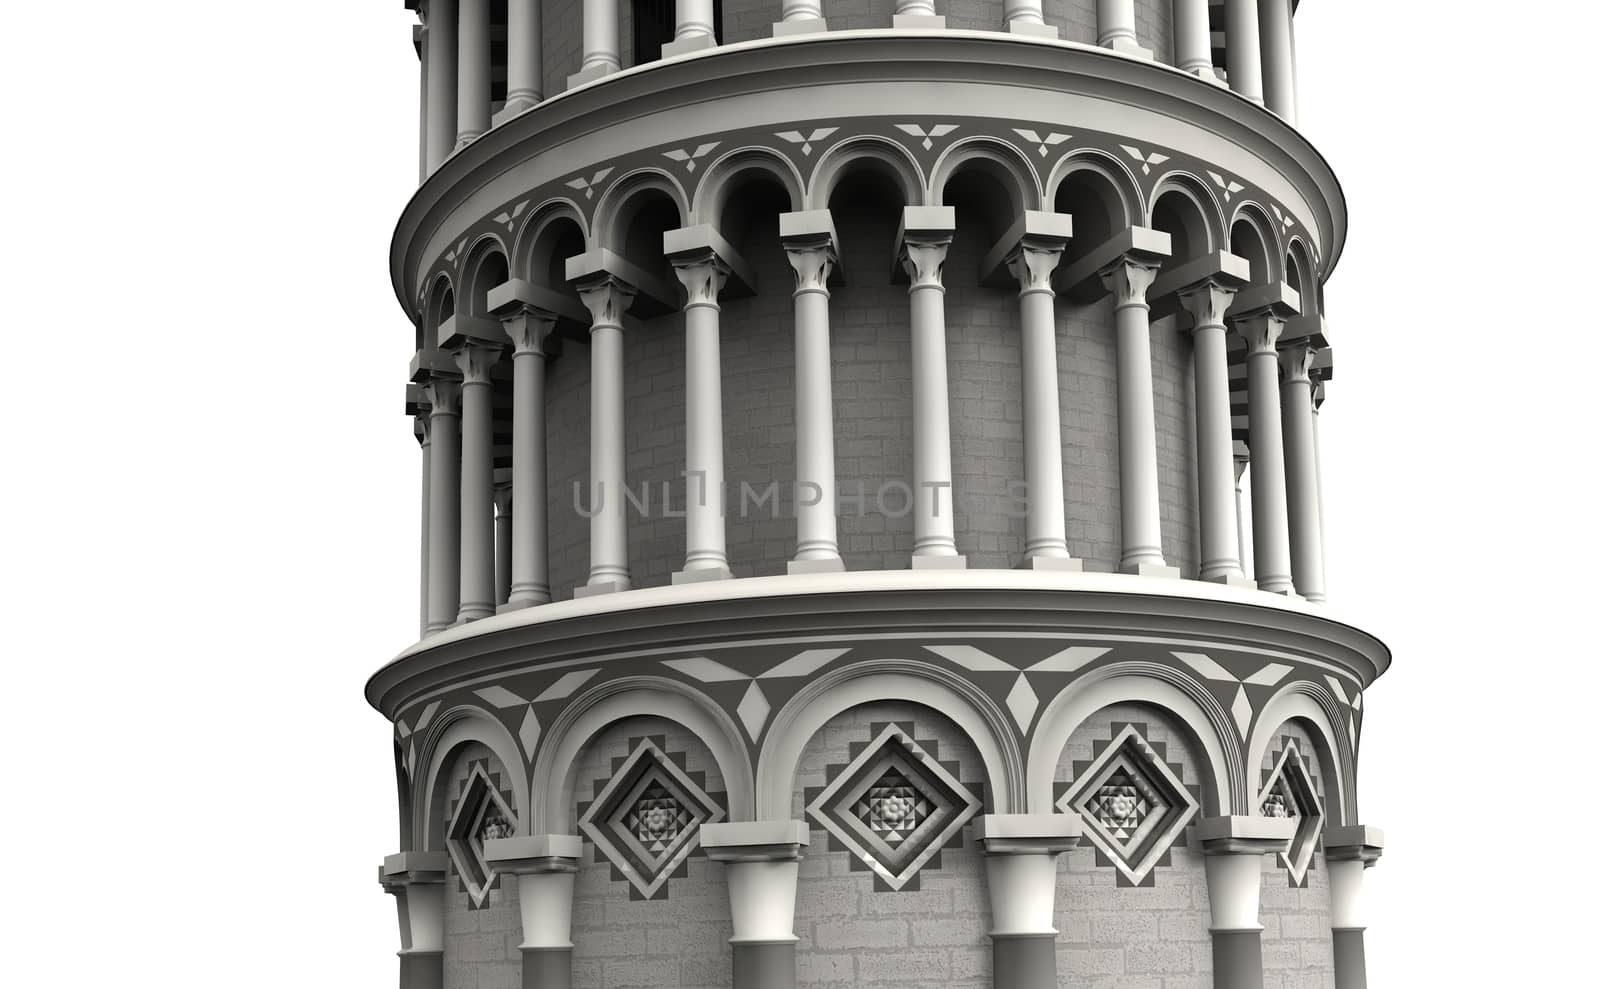 Leaning Tower of Pisa 6 by 3DAgentur